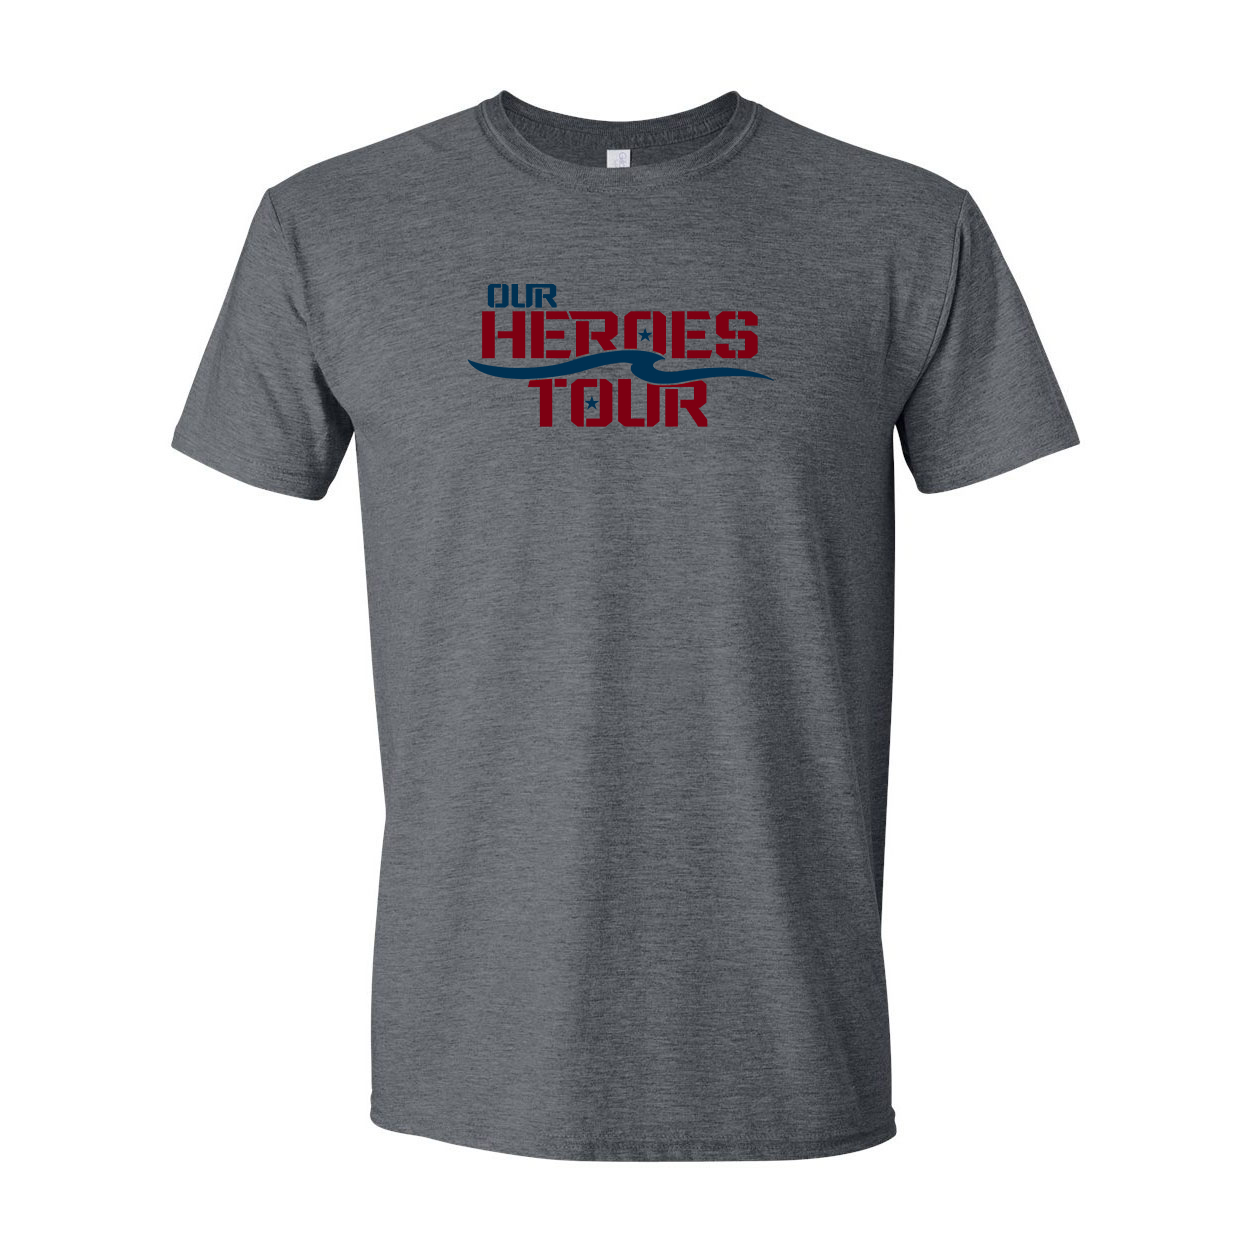 Our Heroes Tour Classic T-Shirt Dark Heather Gray (White Logo)